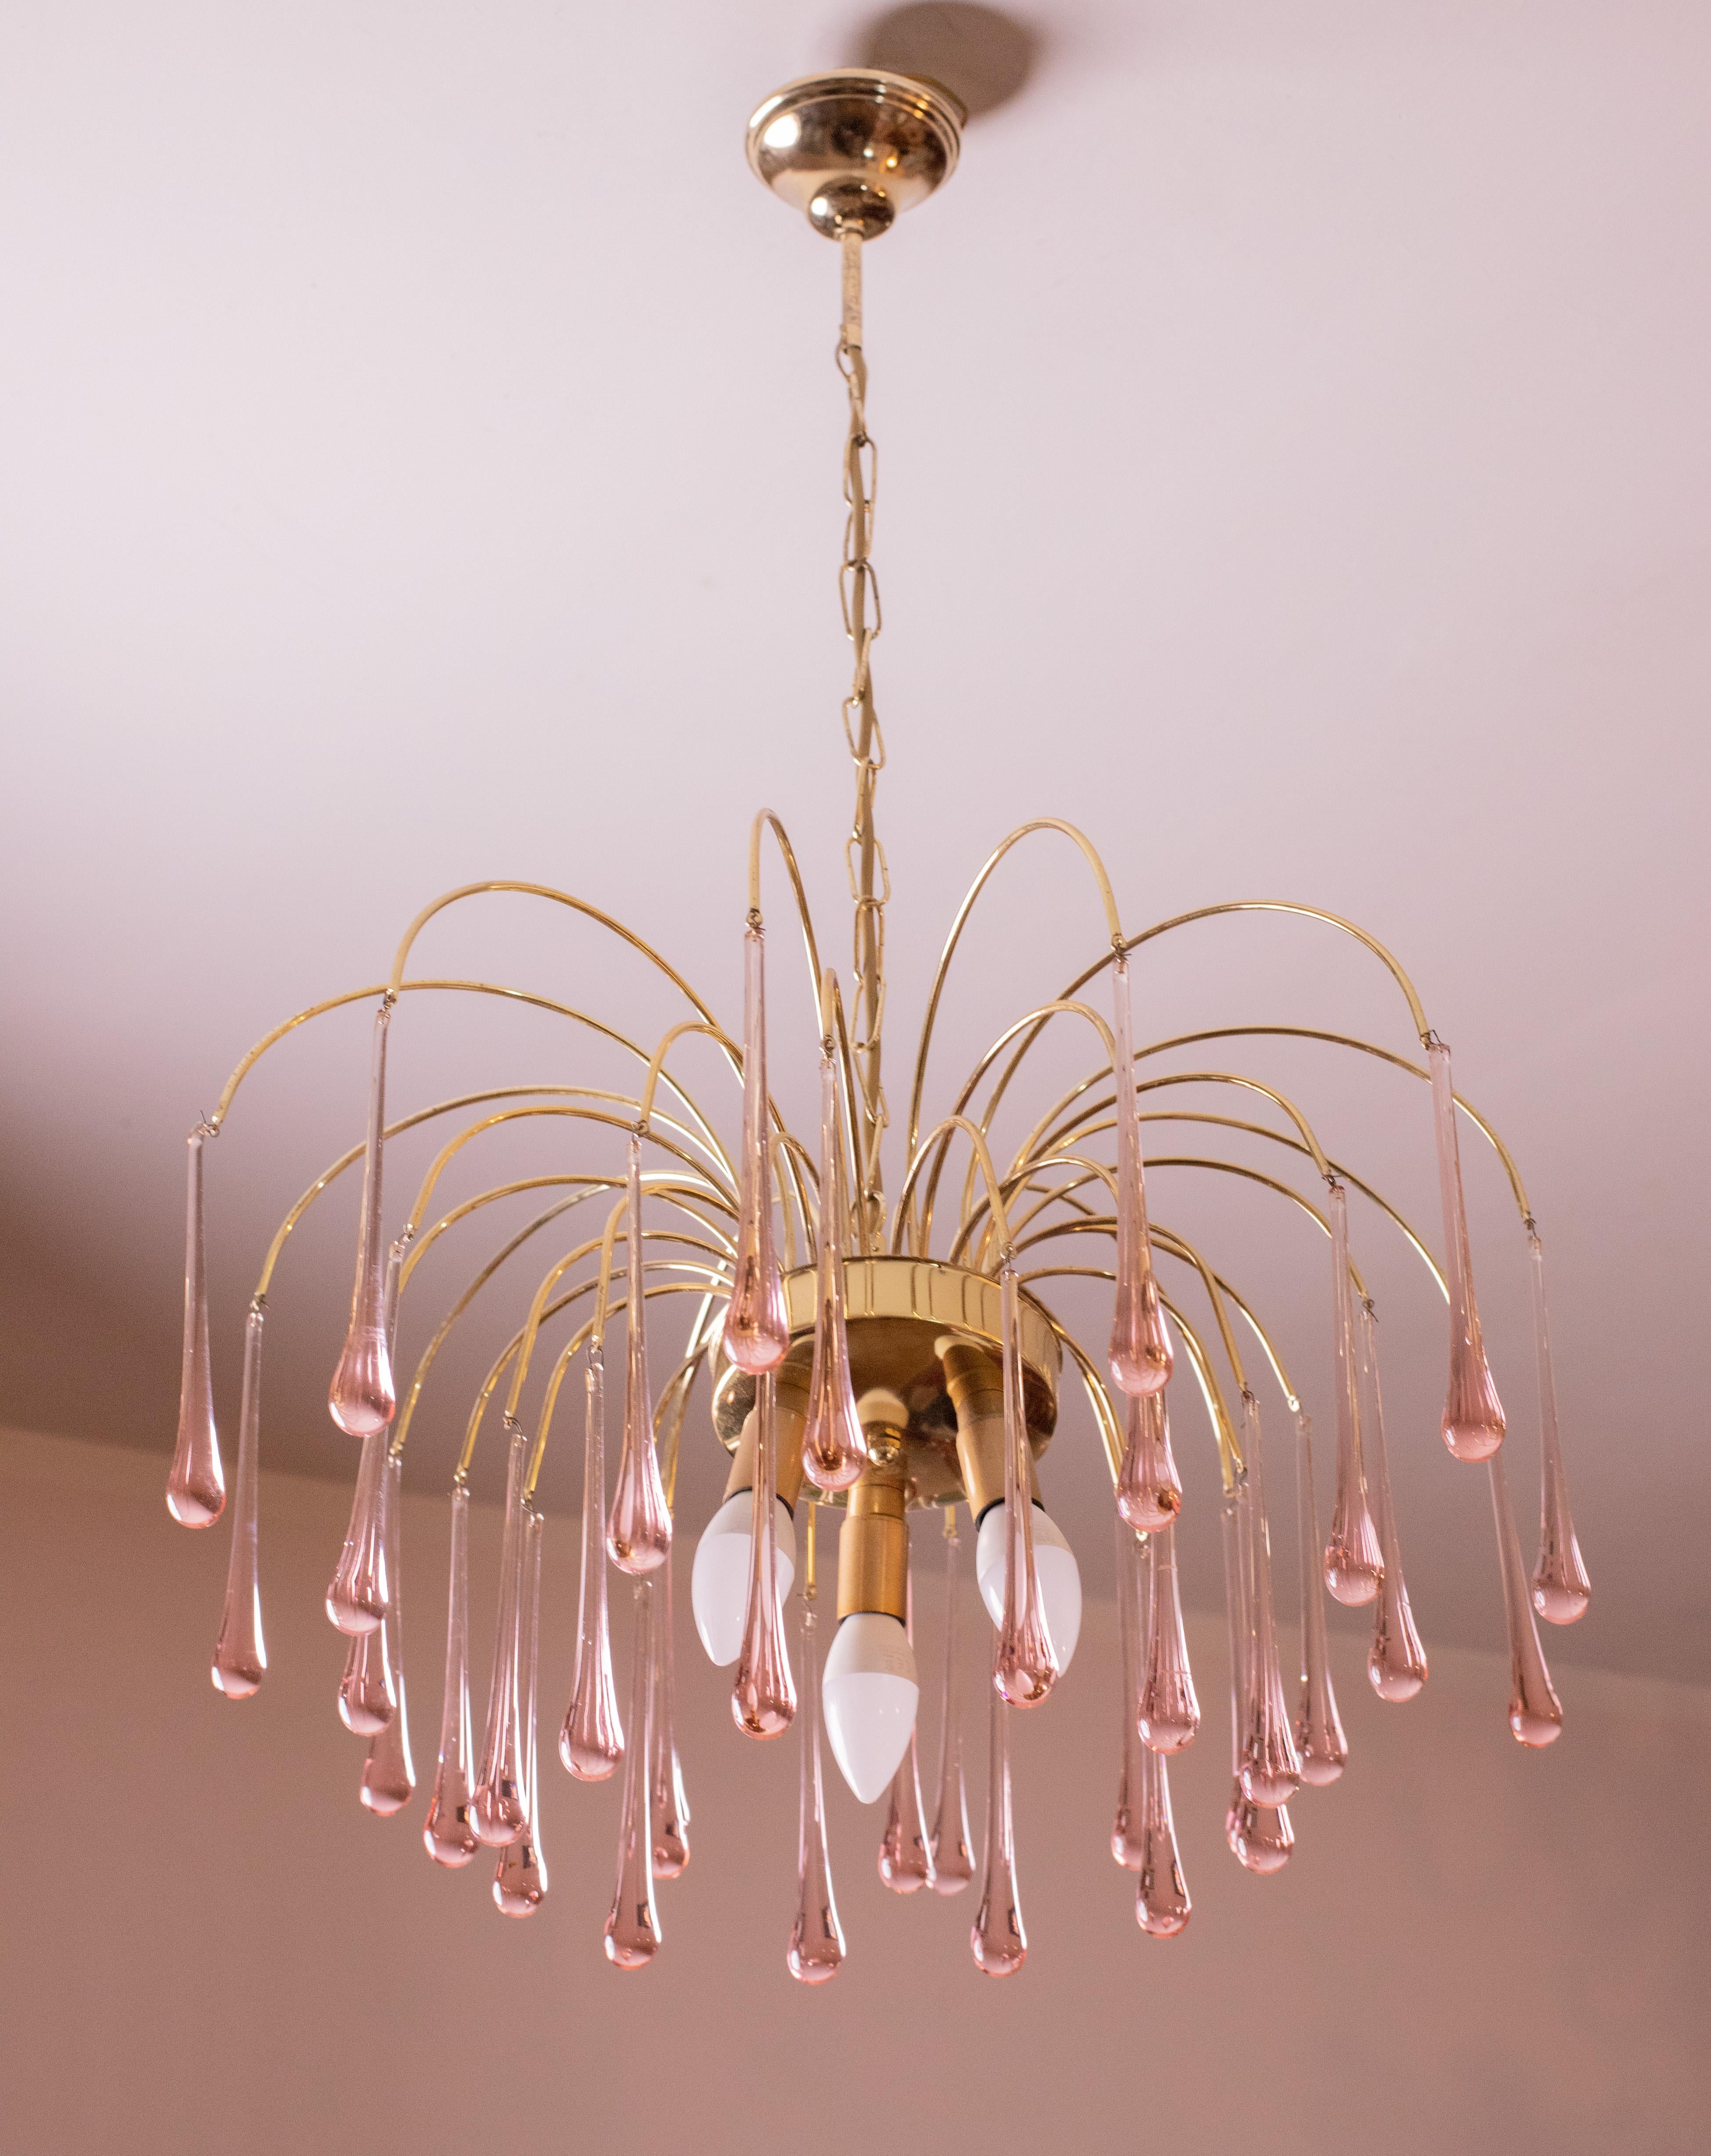 Gorgeous Murano chandelier in the style of Venini La Cascata.
The chandelier consists of three rounds composed of beautiful transparent pink drops cascading down.
The chandelier consists of 3 e14 light points, the frame is in gold bath, in perfect